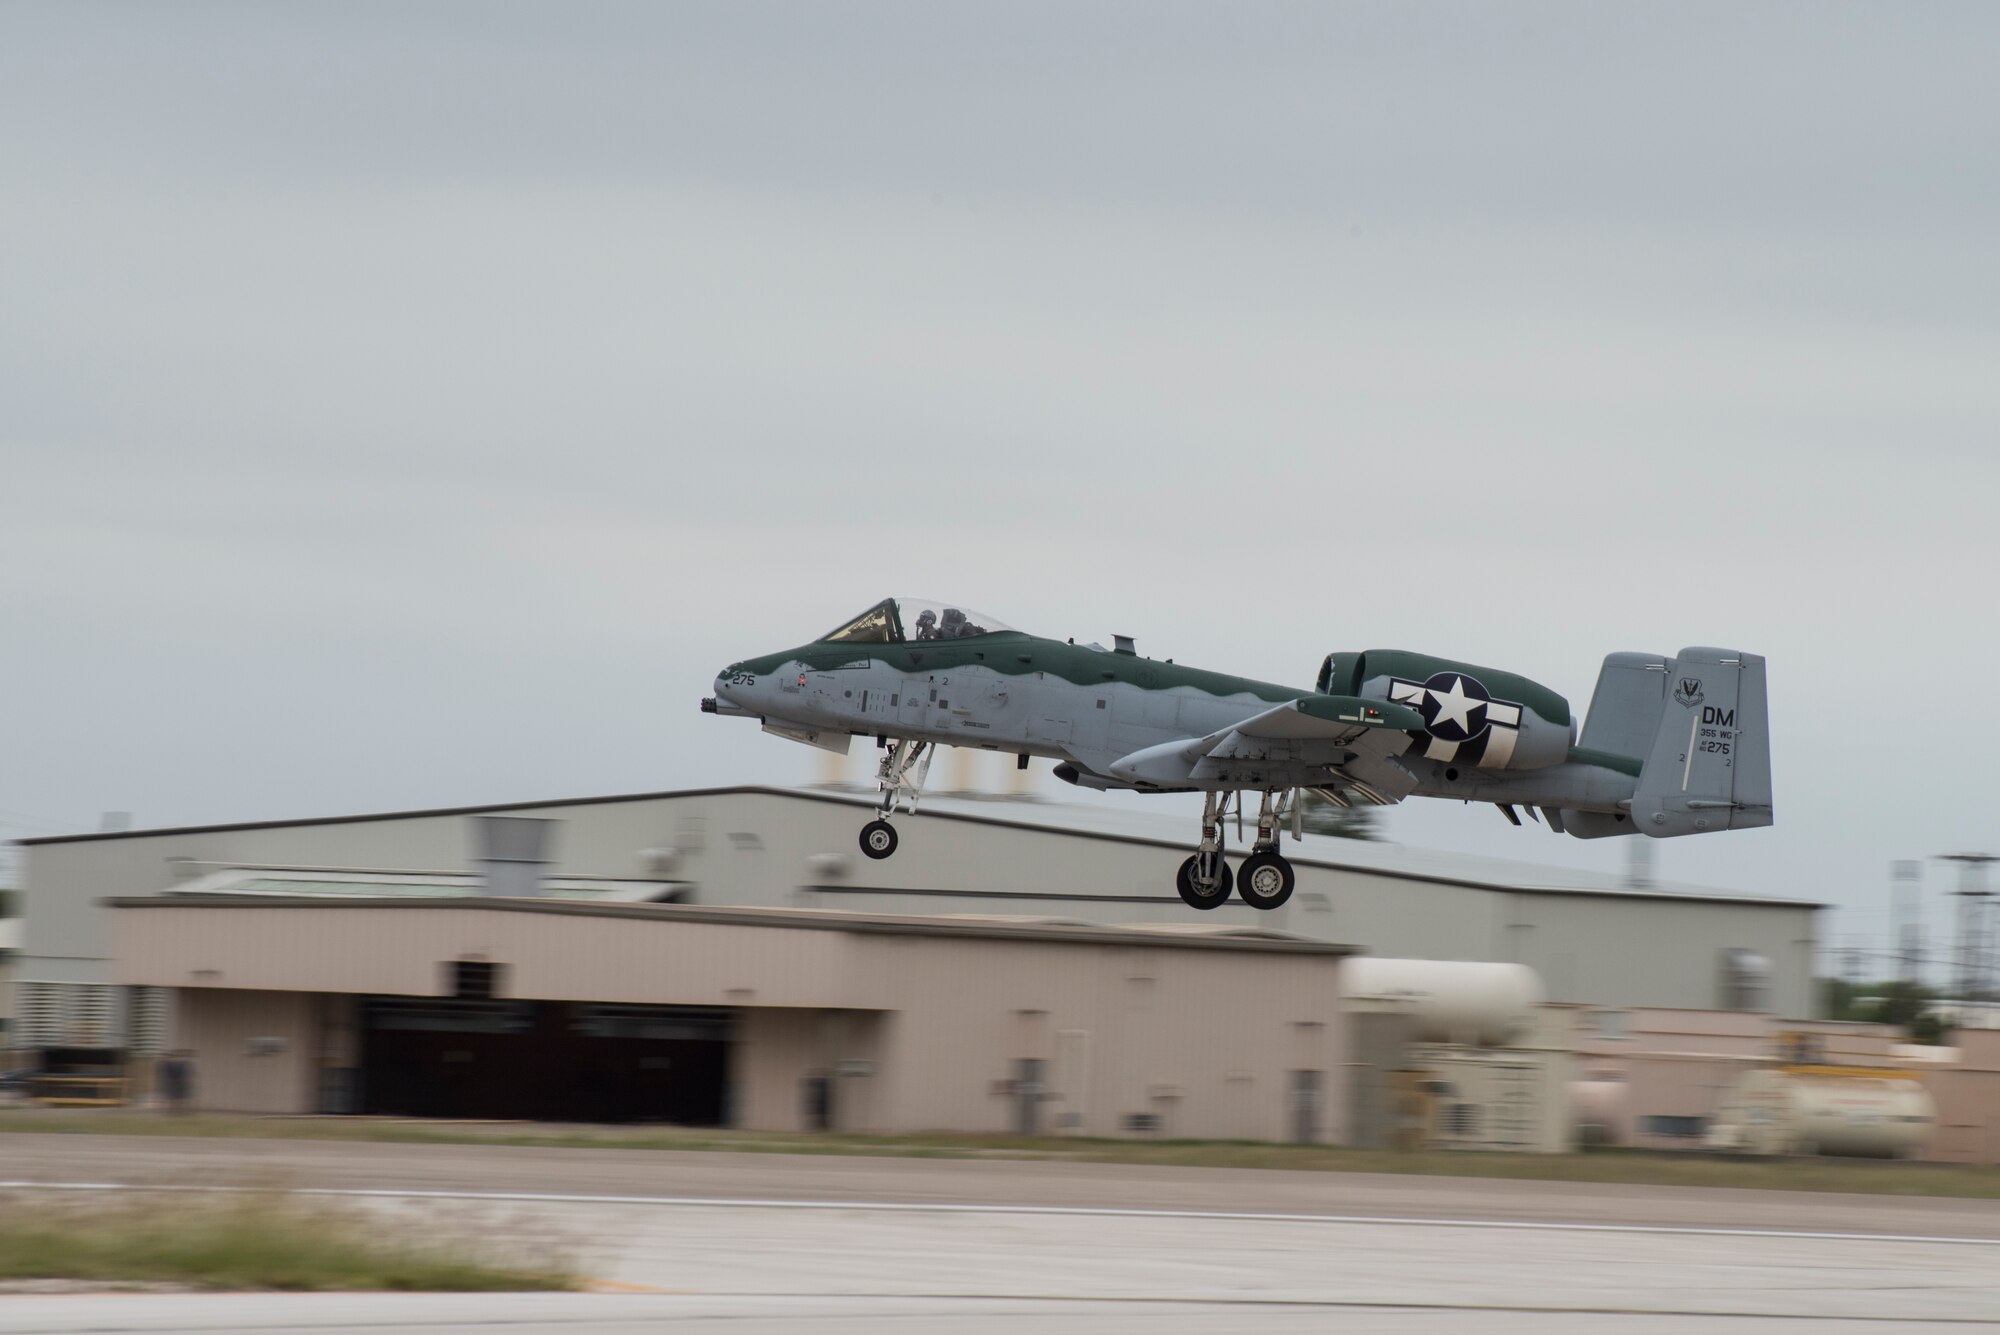 An A-10 Thunderbolt II, from the A-10 Demonstration Team, Davis-Monthan Air Force Base, Ariz., lands at Laughlin Air Force Base, Texas on Oct. 13, 2020. They spent a week touring the Air Force’s Specialized Undergraduate Pilot Training bases to demonstrate their aircraft and to brief students in training on their capabilities. (U.S. Air Force photo by Senior Anne McCready)